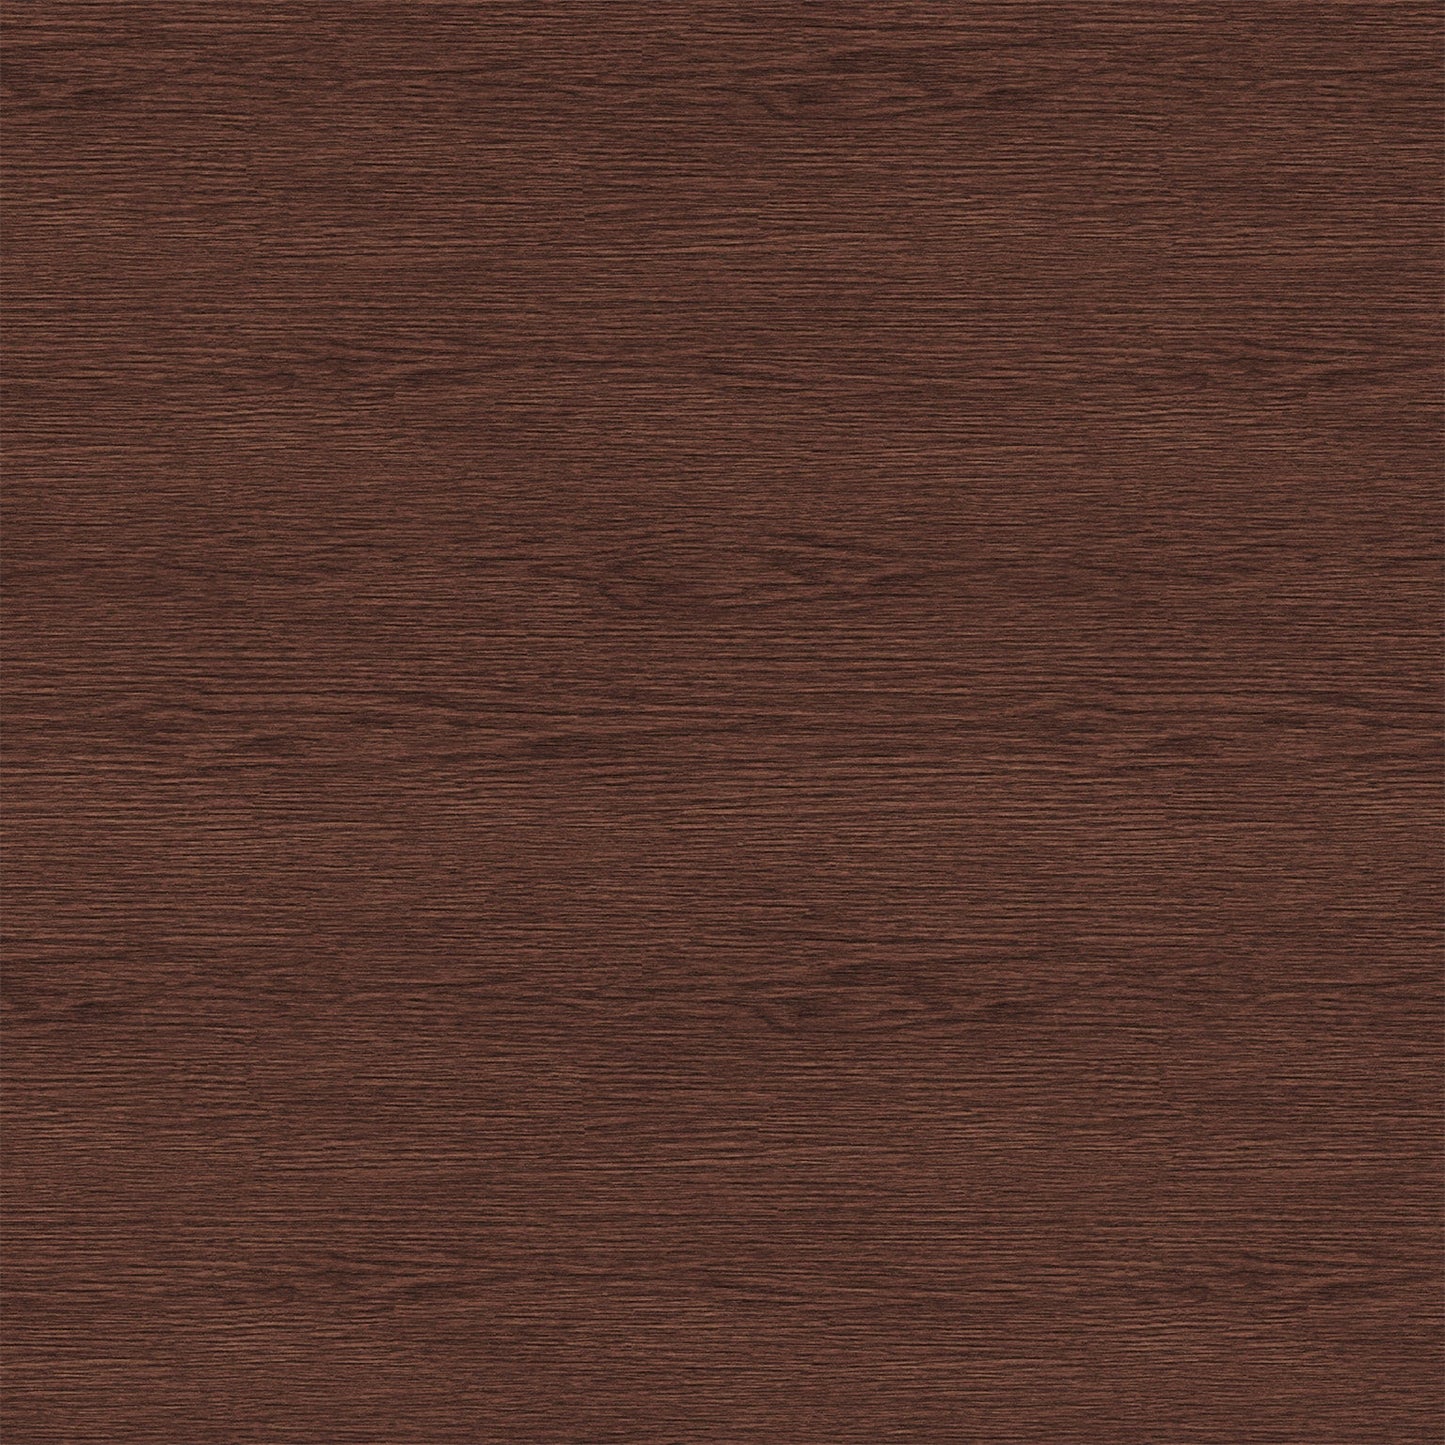 Oak Veneer, Red-stained, Lacquer